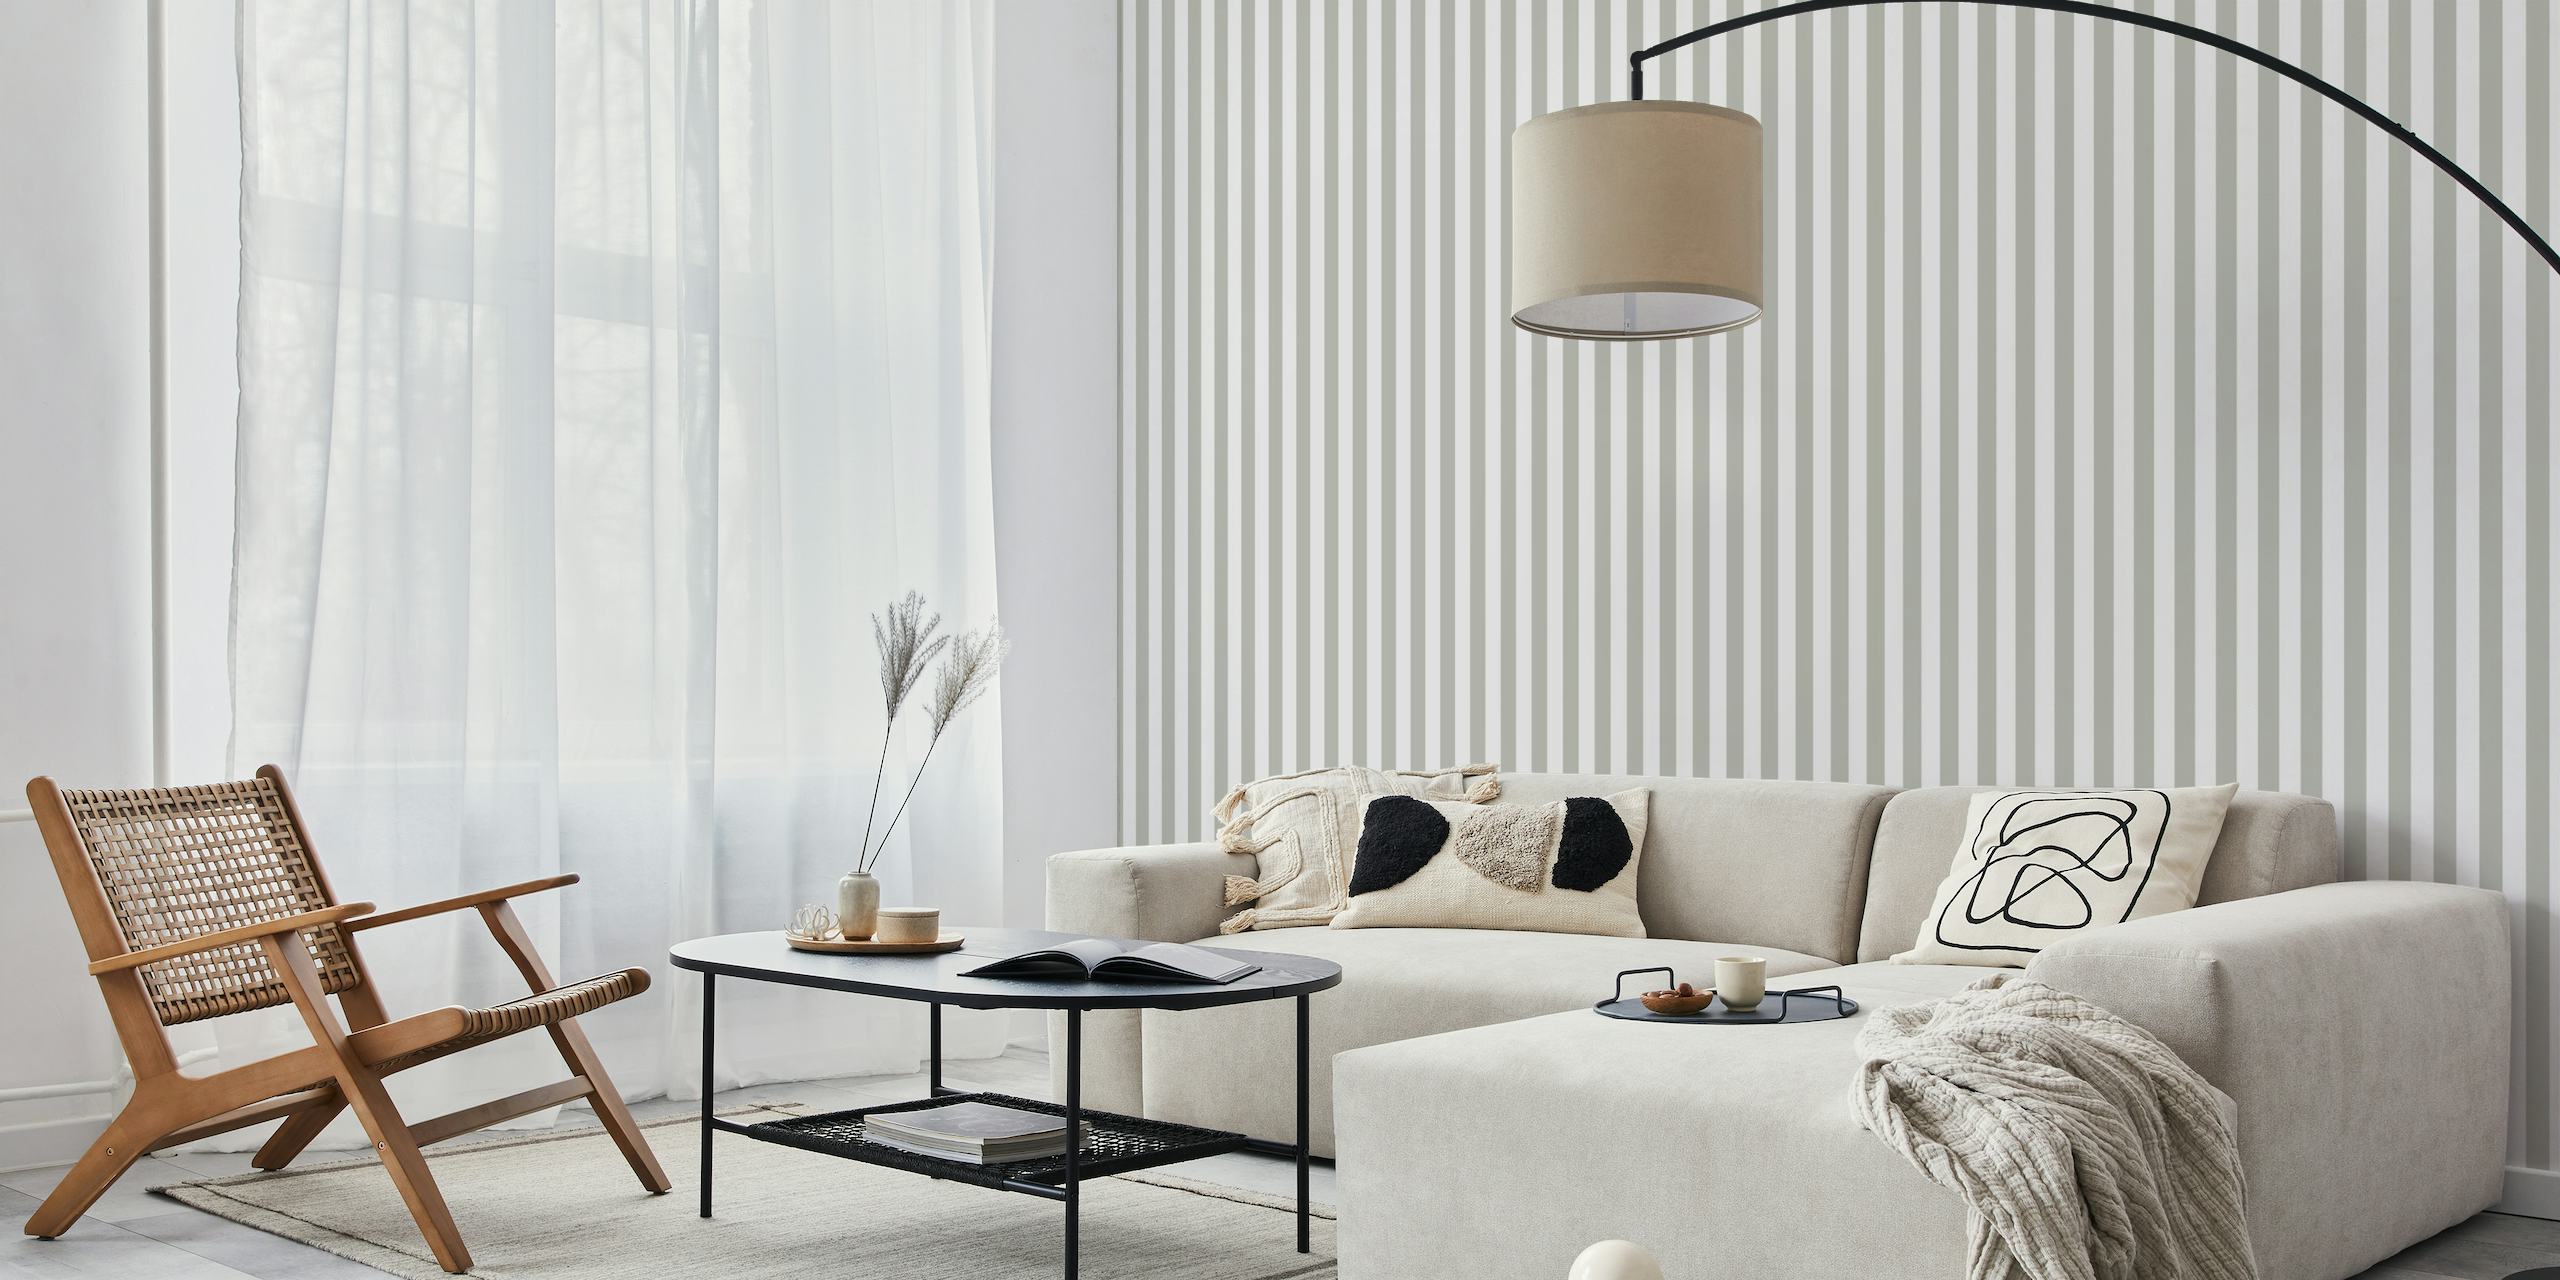 Scandi Stripes - Gray wall mural showing subtle gray and white vertical stripes for a modern minimalist decor